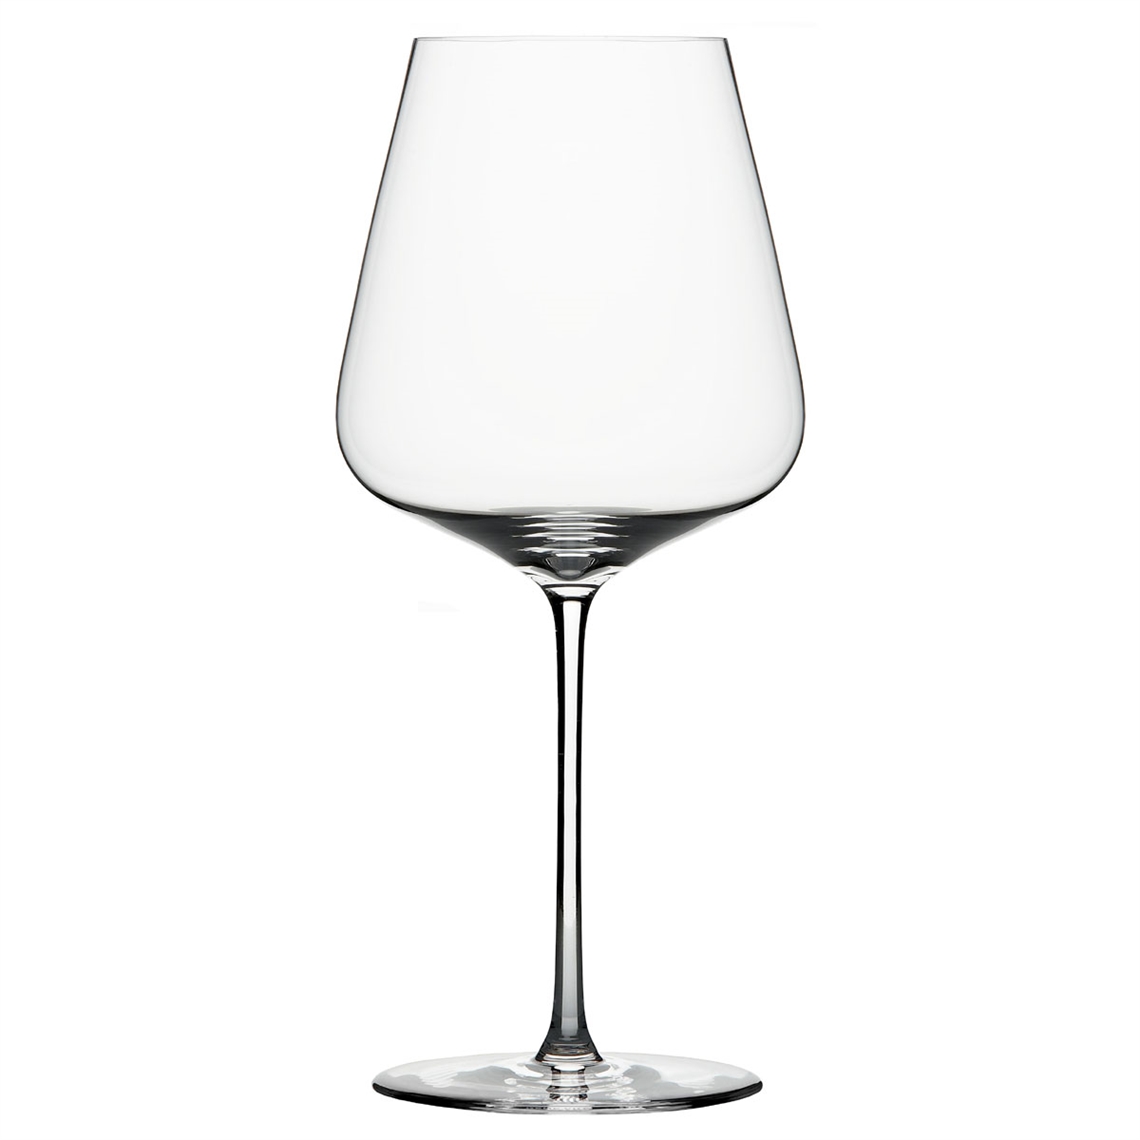 View more riedel from our Premium Mouth Blown Glassware range